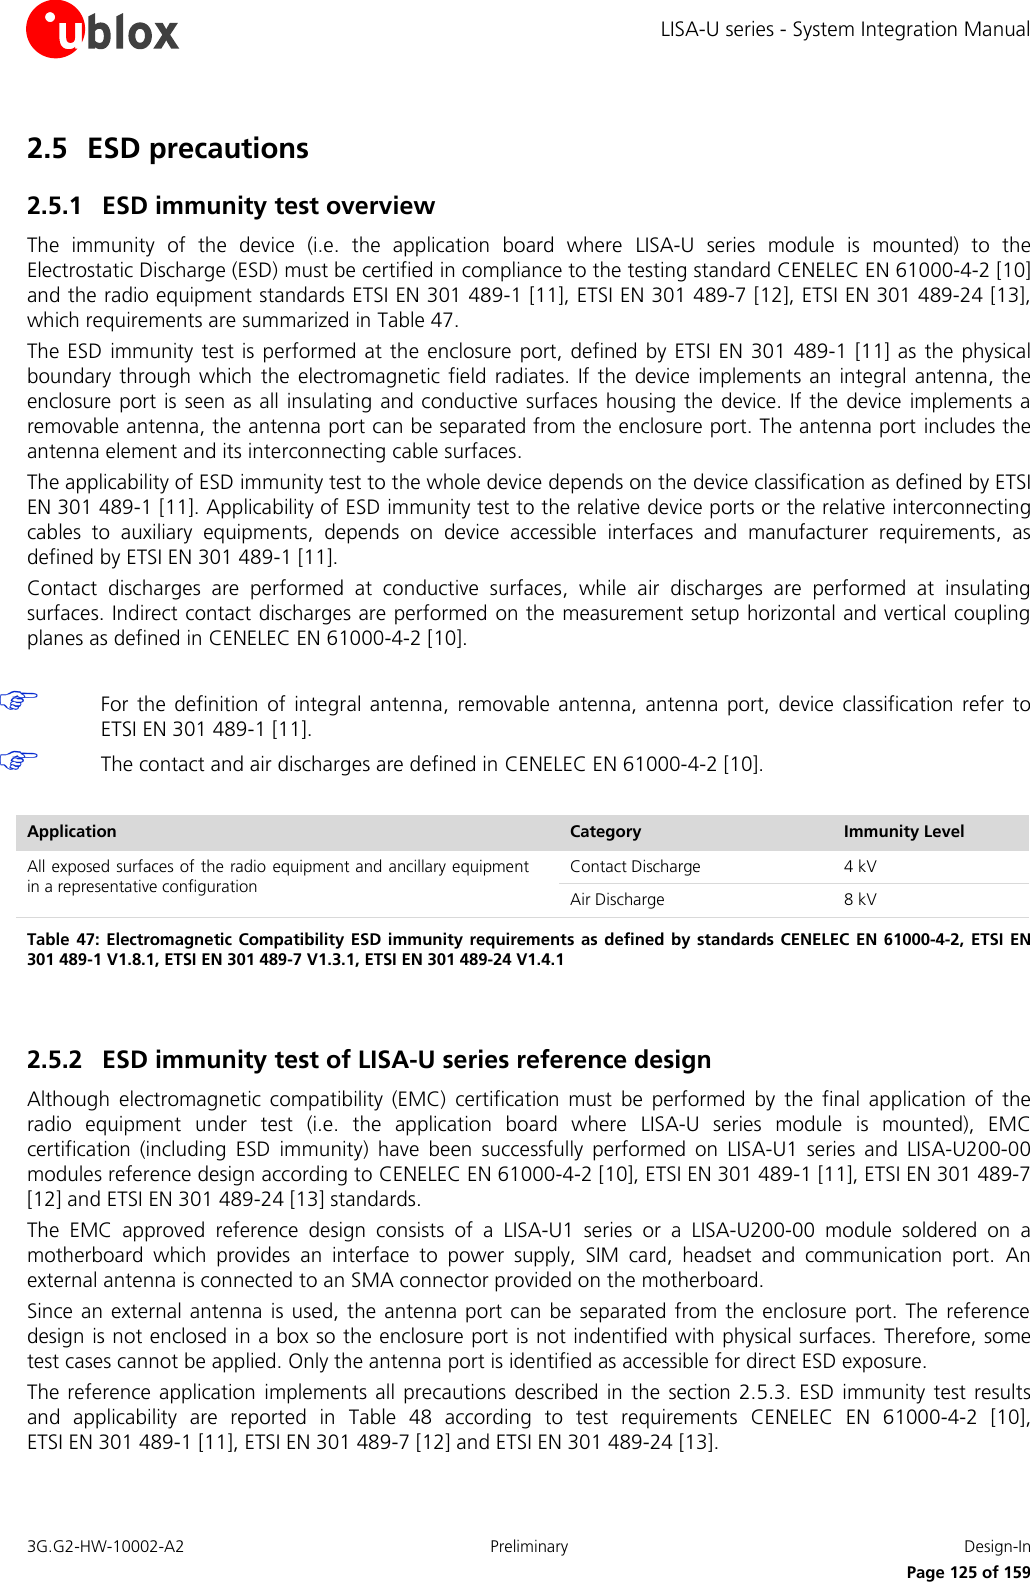 LISA-U series - System Integration Manual 3G.G2-HW-10002-A2  Preliminary  Design-In      Page 125 of 159 2.5 ESD precautions  2.5.1 ESD immunity test overview The  immunity  of  the  device  (i.e.  the  application  board  where  LISA-U  series  module  is  mounted)  to  the Electrostatic Discharge (ESD) must be certified in compliance to the testing standard CENELEC EN 61000-4-2 [10] and the radio equipment standards ETSI EN 301 489-1 [11], ETSI EN 301 489-7 [12], ETSI EN 301 489-24 [13], which requirements are summarized in Table 47. The ESD  immunity test is  performed  at the enclosure  port, defined by  ETSI EN 301 489-1 [11] as the physical boundary through  which  the electromagnetic field radiates. If  the device  implements an integral antenna, the enclosure port is seen as all insulating and conductive surfaces housing the device. If the device implements a removable antenna, the antenna port can be separated from the enclosure port. The antenna port includes the antenna element and its interconnecting cable surfaces. The applicability of ESD immunity test to the whole device depends on the device classification as defined by ETSI EN 301 489-1 [11]. Applicability of ESD immunity test to the relative device ports or the relative interconnecting cables  to  auxiliary  equipments,  depends  on  device  accessible  interfaces  and  manufacturer  requirements,  as defined by ETSI EN 301 489-1 [11]. Contact  discharges  are  performed  at  conductive  surfaces,  while  air  discharges  are  performed  at  insulating surfaces. Indirect contact discharges are performed  on the measurement setup horizontal and vertical coupling planes as defined in CENELEC EN 61000-4-2 [10].   For  the definition  of  integral  antenna,  removable  antenna,  antenna  port,  device  classification  refer  to ETSI EN 301 489-1 [11].  The contact and air discharges are defined in CENELEC EN 61000-4-2 [10].  Application Category Immunity Level All exposed surfaces of the radio equipment and ancillary equipment in a representative configuration Contact Discharge 4 kV Air Discharge 8 kV Table 47:  Electromagnetic Compatibility ESD immunity requirements as  defined by  standards CENELEC EN 61000-4-2, ETSI EN 301 489-1 V1.8.1, ETSI EN 301 489-7 V1.3.1, ETSI EN 301 489-24 V1.4.1  2.5.2 ESD immunity test of LISA-U series reference design Although  electromagnetic  compatibility  (EMC)  certification  must  be  performed  by  the  final  application  of  the radio  equipment  under  test  (i.e.  the  application  board  where  LISA-U  series  module  is  mounted),  EMC certification  (including  ESD  immunity)  have  been  successfully  performed  on  LISA-U1  series  and  LISA-U200-00 modules reference design according to CENELEC EN 61000-4-2 [10], ETSI EN 301 489-1 [11], ETSI EN 301 489-7 [12] and ETSI EN 301 489-24 [13] standards. The  EMC  approved  reference  design  consists  of  a  LISA-U1  series  or  a  LISA-U200-00  module  soldered  on  a motherboard  which  provides  an  interface  to  power  supply,  SIM  card,  headset  and  communication  port.  An external antenna is connected to an SMA connector provided on the motherboard. Since an external antenna  is used, the antenna port can be separated from the enclosure port. The reference design is not enclosed in a box so the enclosure port is not indentified with physical surfaces. Therefore, some test cases cannot be applied. Only the antenna port is identified as accessible for direct ESD exposure. The reference application  implements all precautions described  in the  section 2.5.3. ESD immunity test  results and  applicability  are  reported  in  Table  48  according  to  test  requirements  CENELEC  EN  61000-4-2  [10],  ETSI EN 301 489-1 [11], ETSI EN 301 489-7 [12] and ETSI EN 301 489-24 [13].  